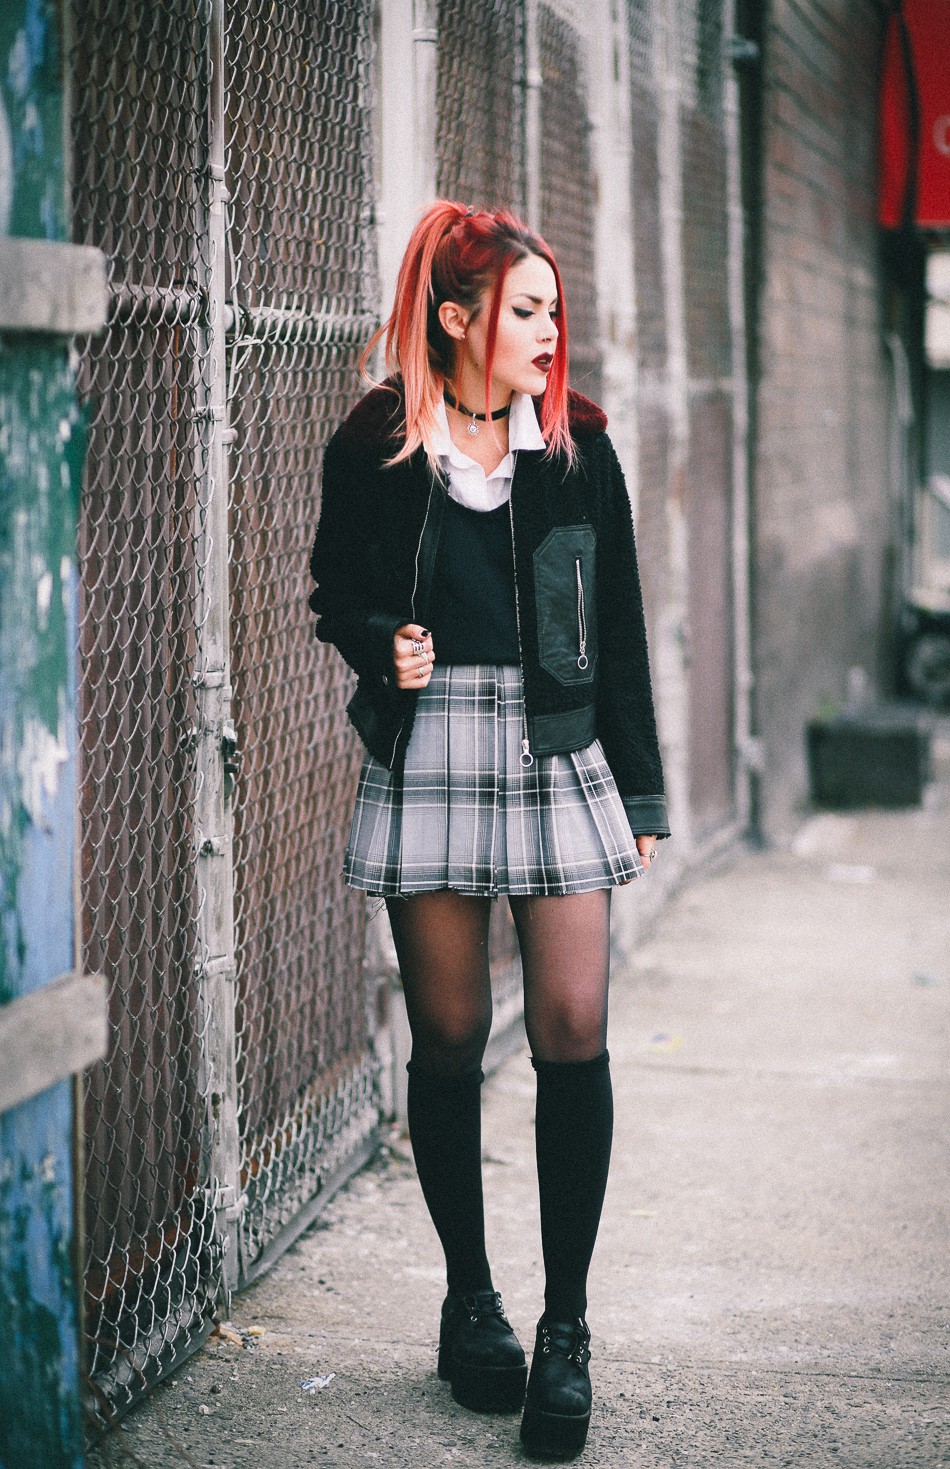 Le Happy wearing Sandro jacket and plaid skirt